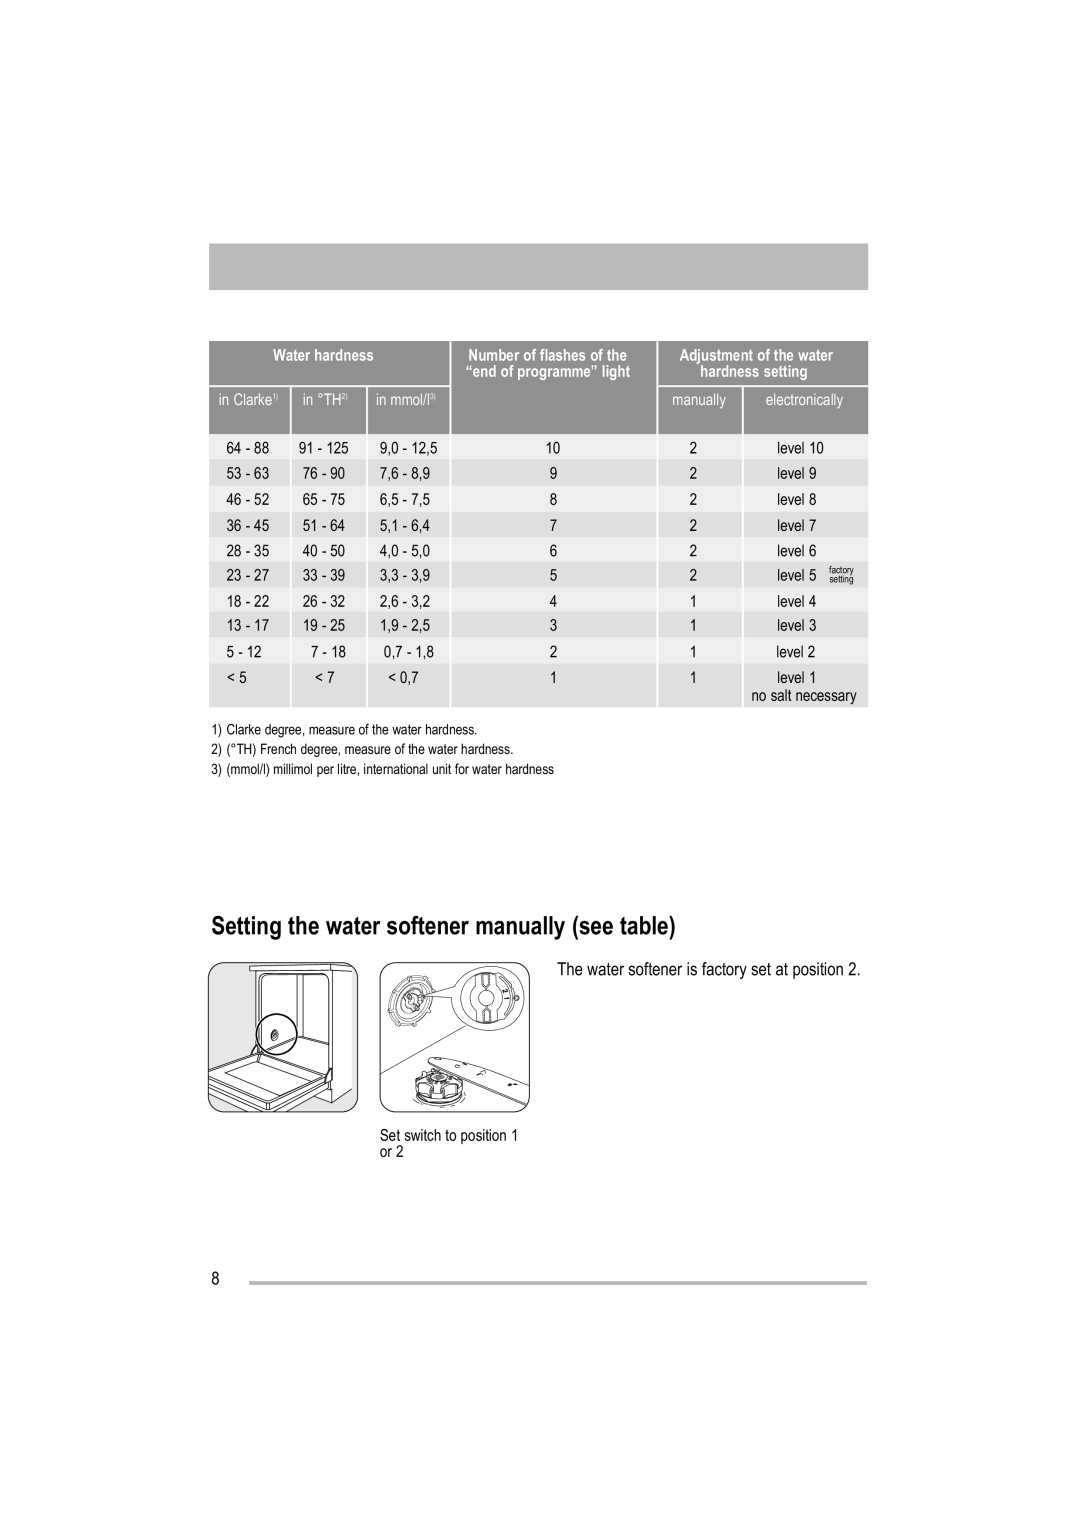 Zanussi ZDF 221 user manual Setting the water softener manually see table, Water hardness, in Clarke1, in TH2, in mmol/l3 